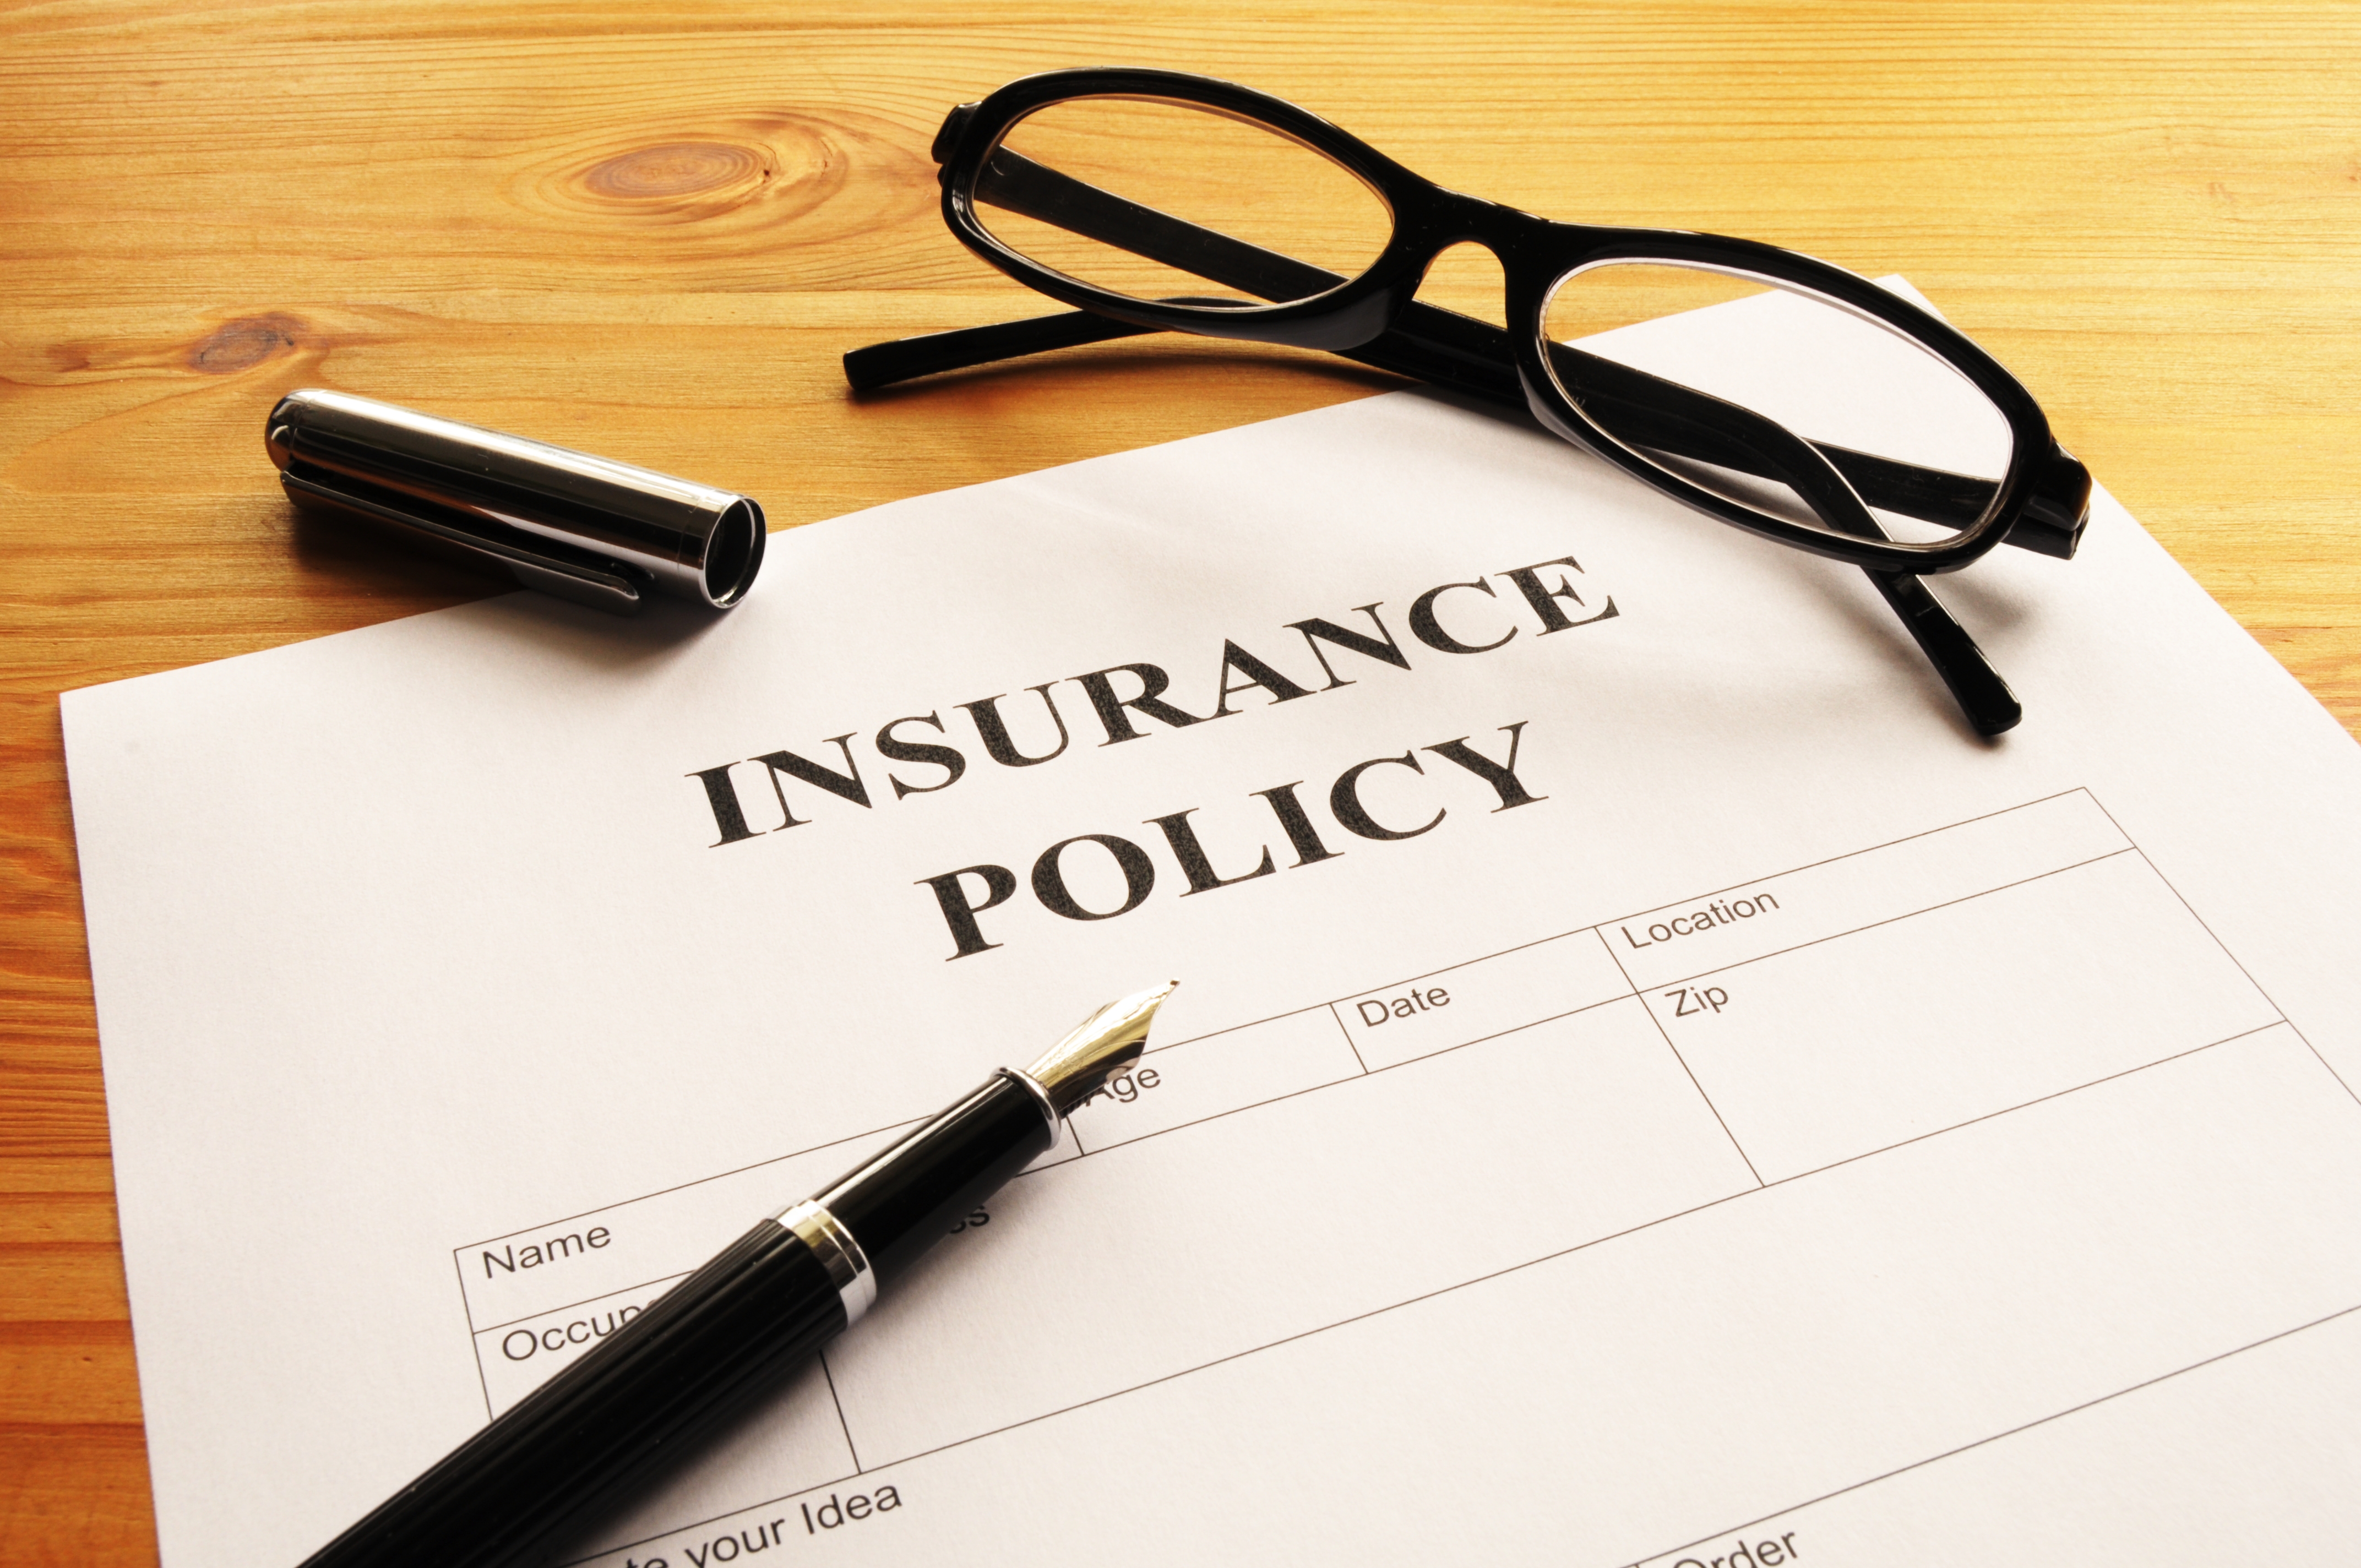 Life insurance policy with pen and a pair of reading glasses